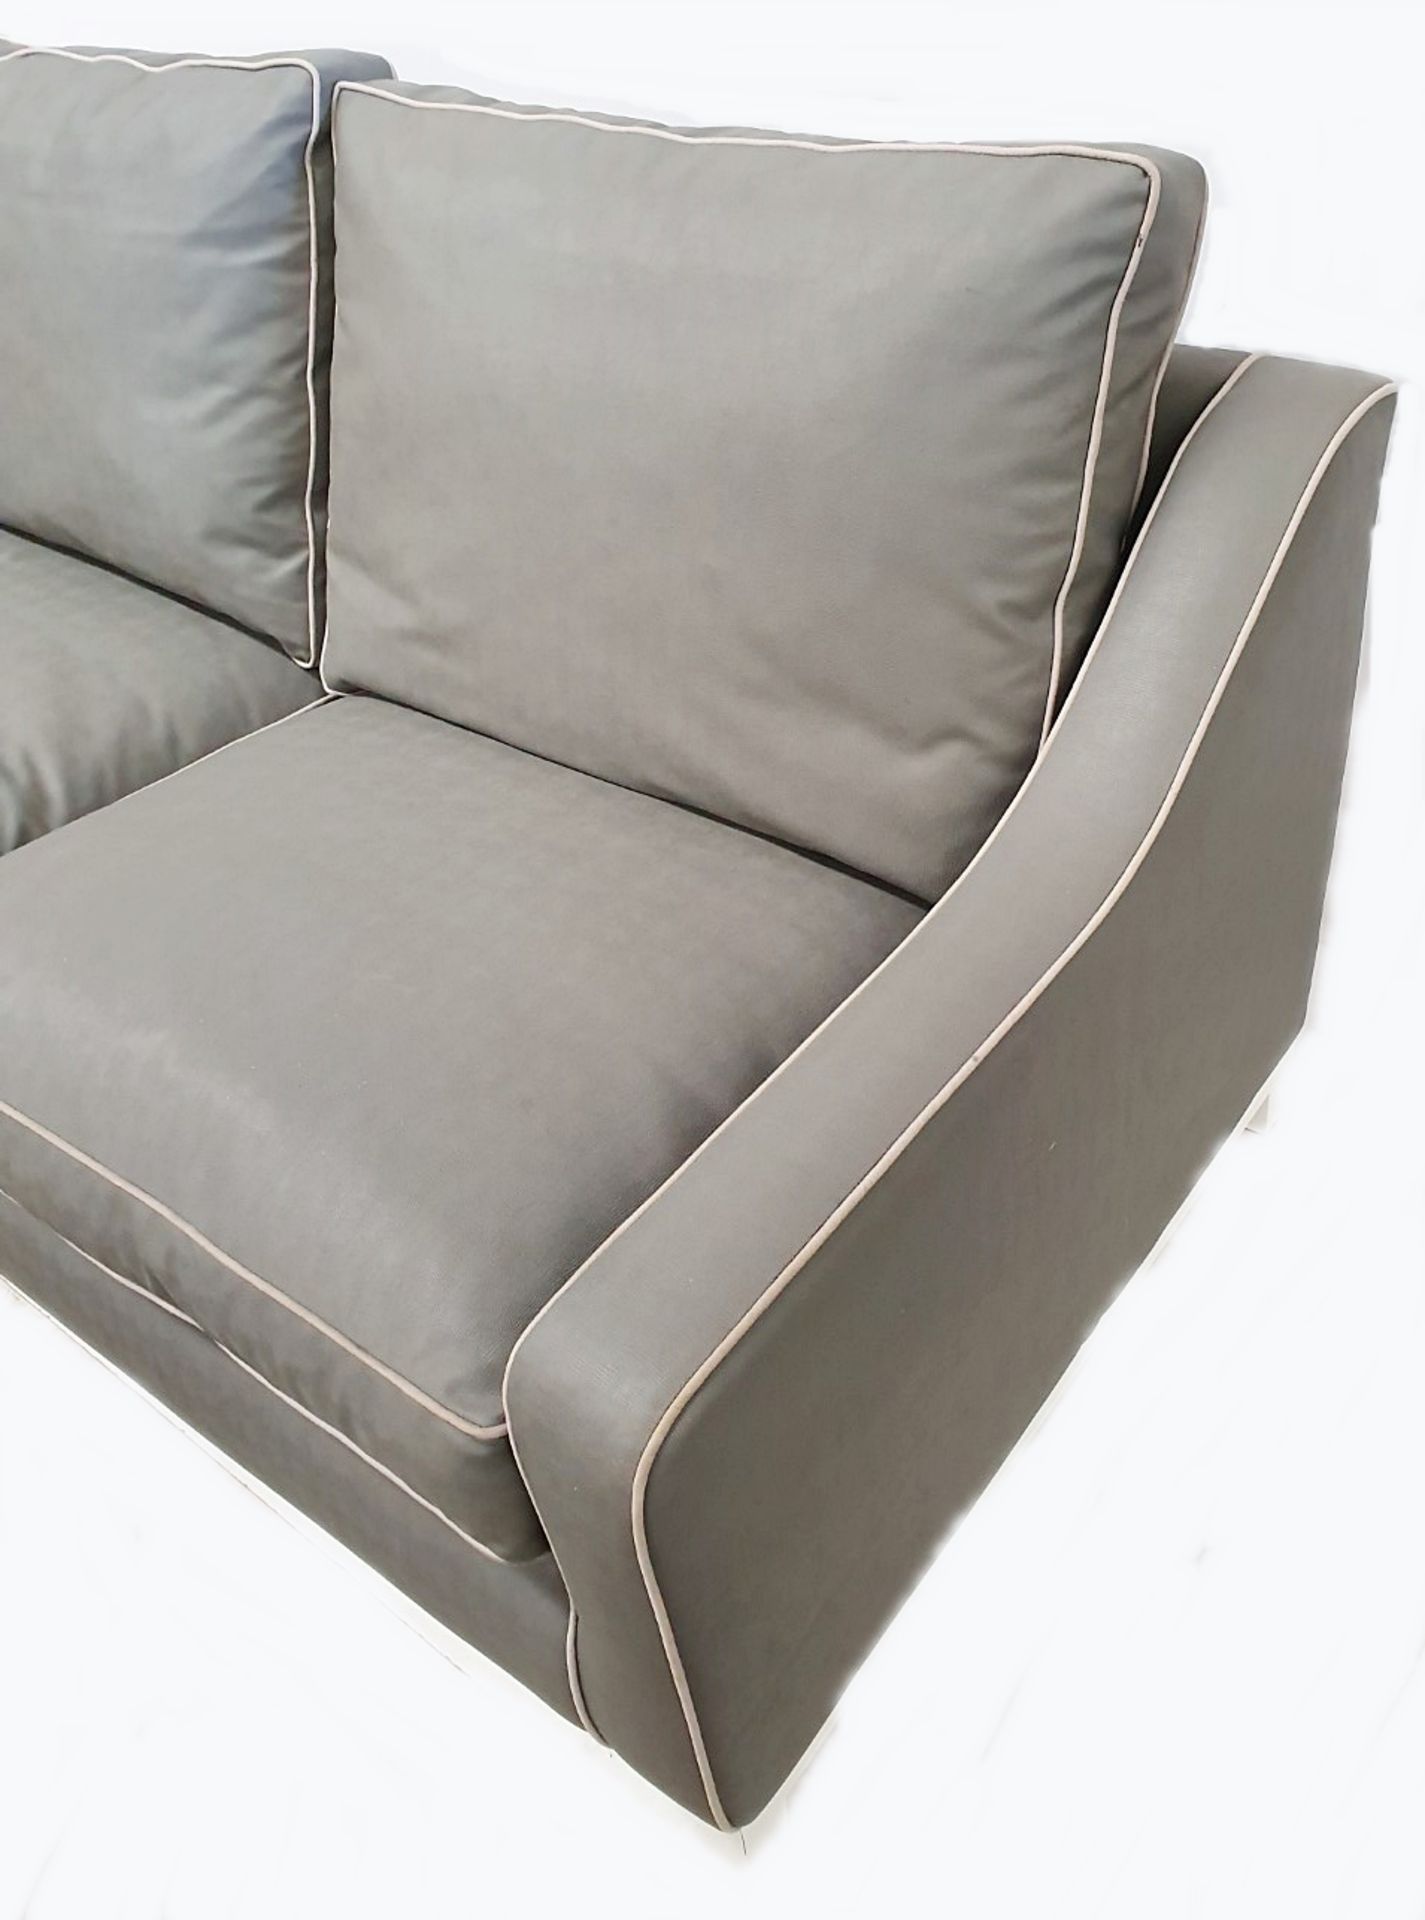 1 x Contemporary 2-Seater Grey Leather Sofa - CL380 - Ref: H582 - Location: Altrincham WA14 - NO VAT - Image 9 of 13